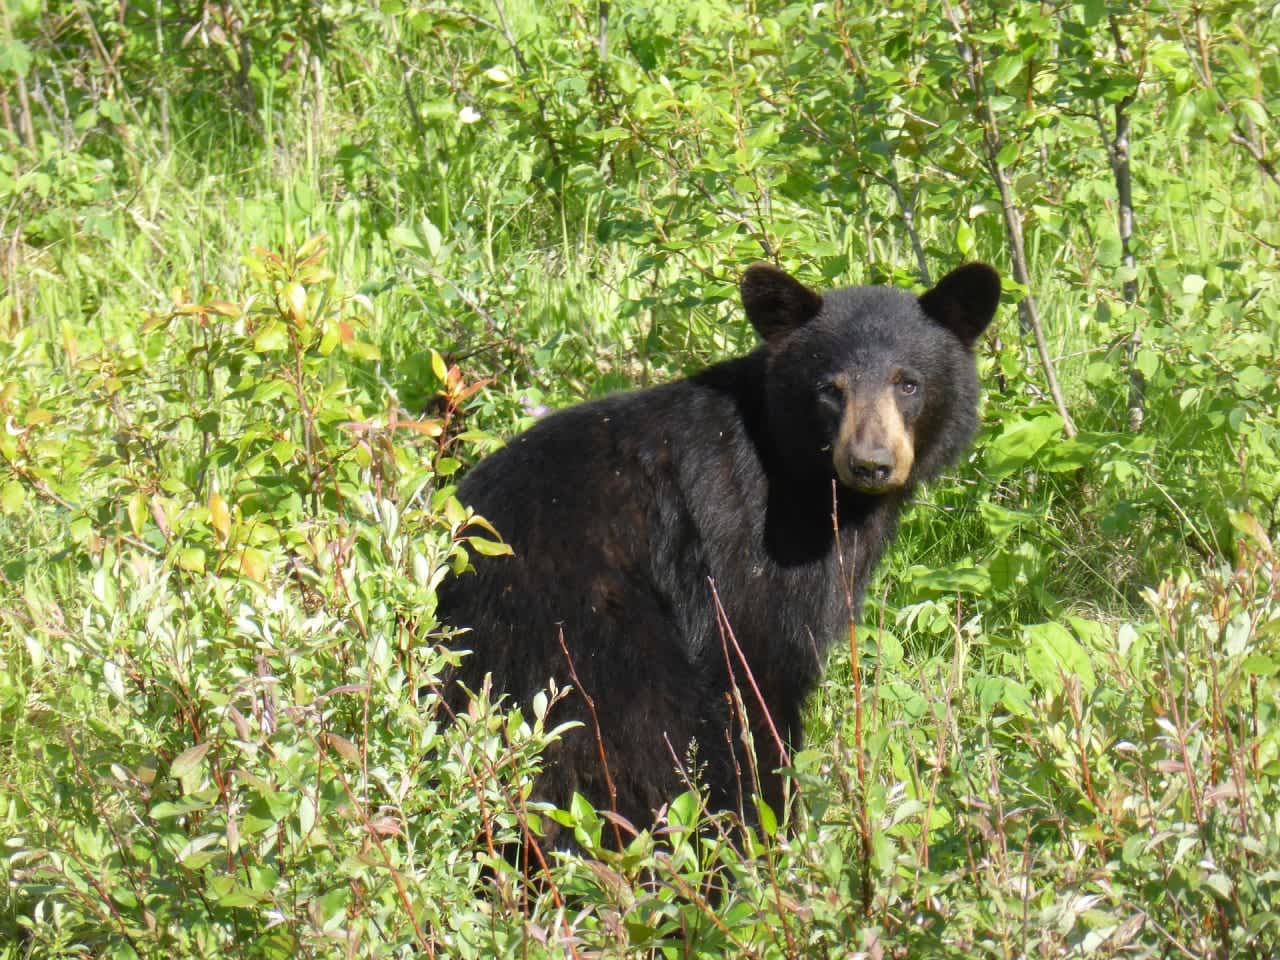 A 10-year-old boy was attacked by a black bear.